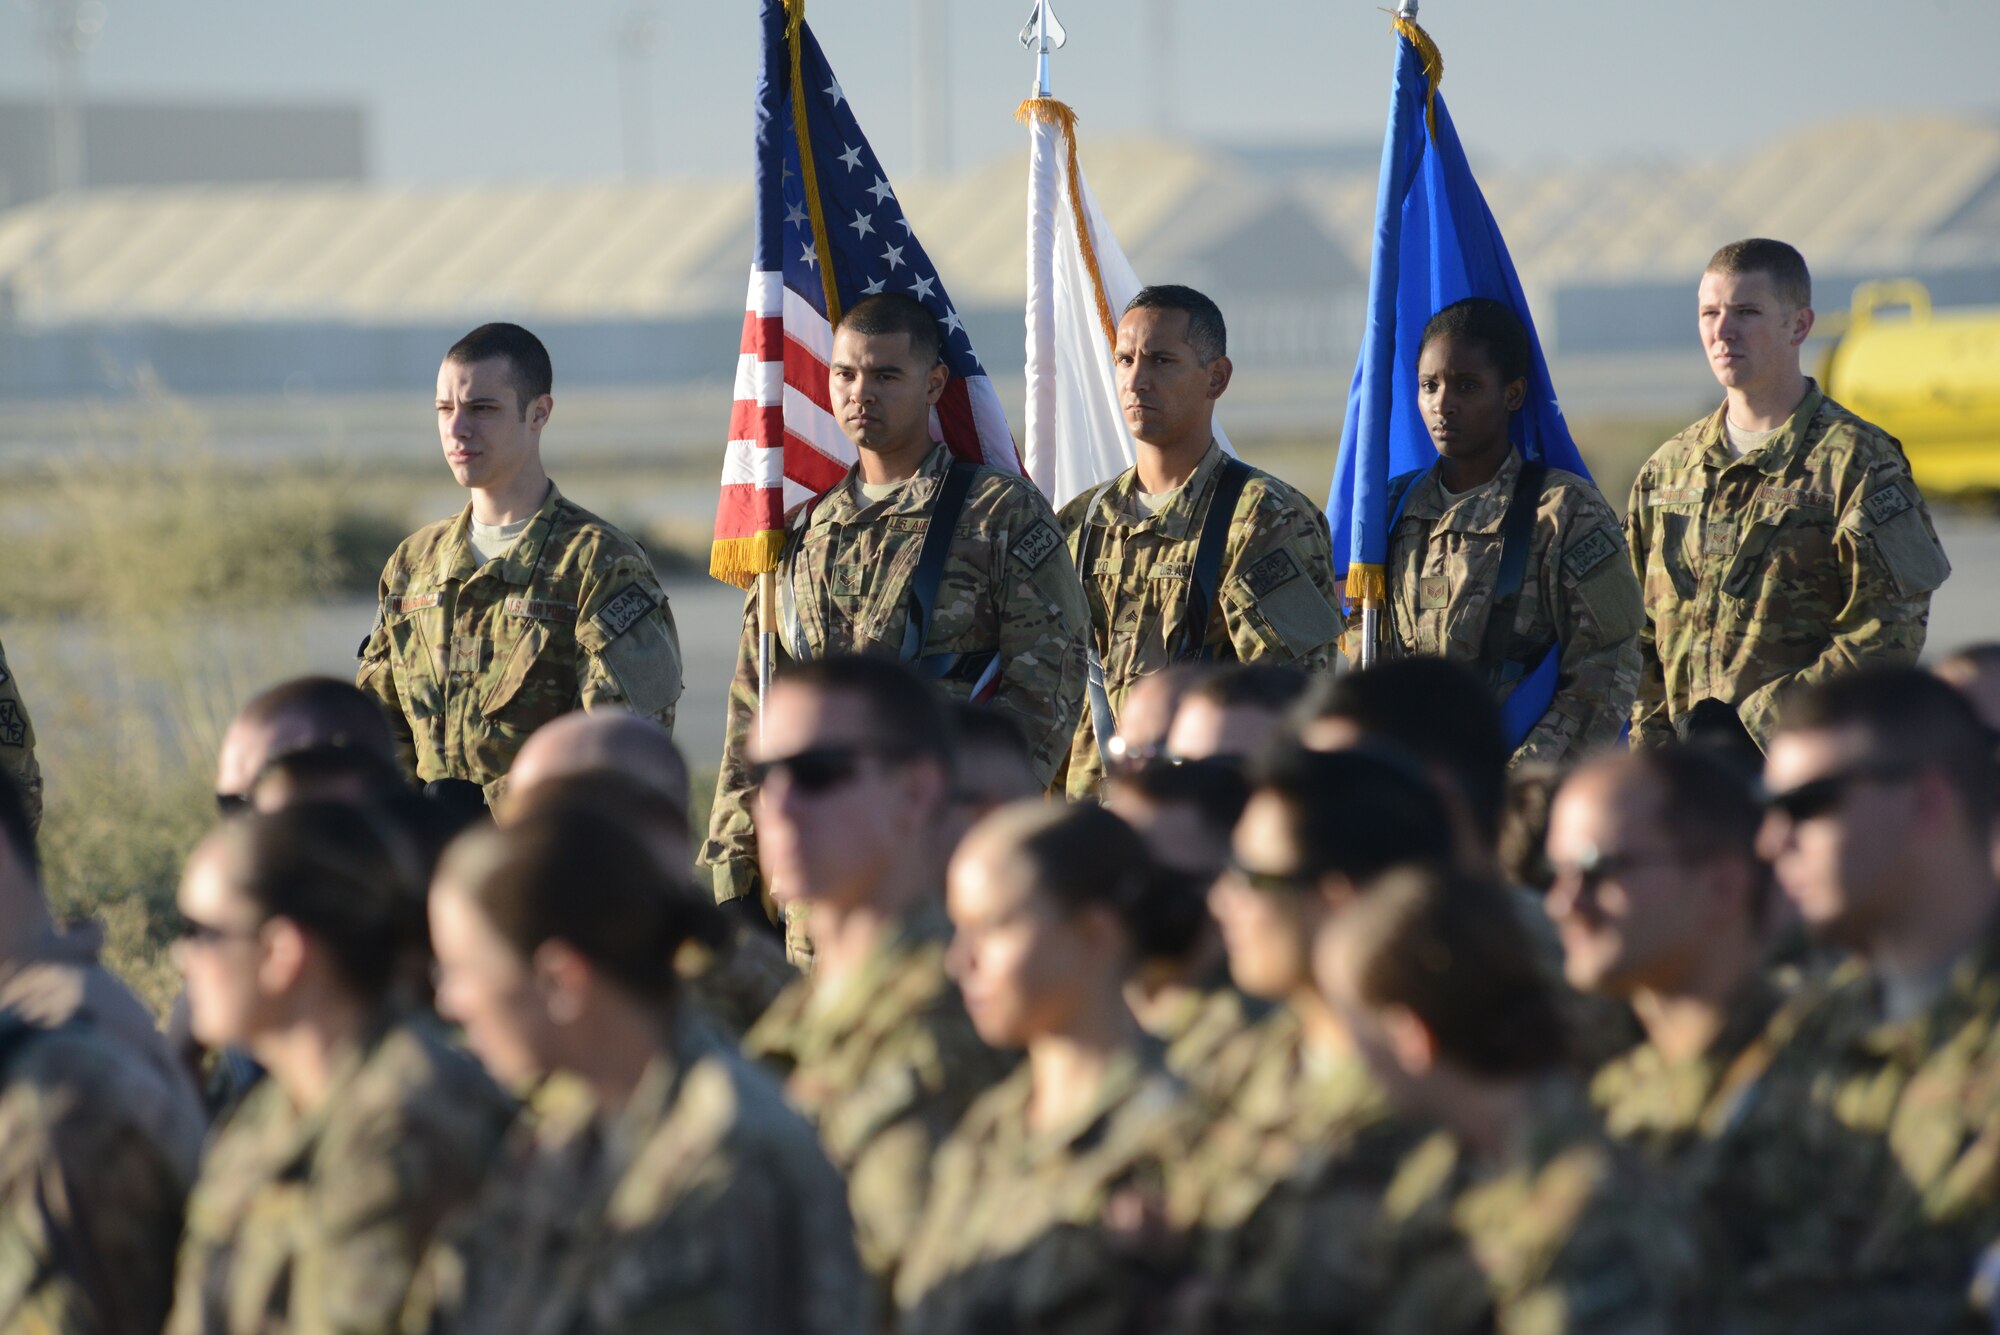 455th Air Expeditionary Wing honor guardsmen stand by waiting for the start of the MC-12W transition of authority ceremony on the flight line of Bagram Airfield, Afghanistan Oct. 1, 2014. The 4 ERS inactivated and Joint Task Force Thor is now the lead for the MC-12W mission in Afghanistan. (U.S. Air Force photo by Master Sgt. Cohen A. Young/Released)